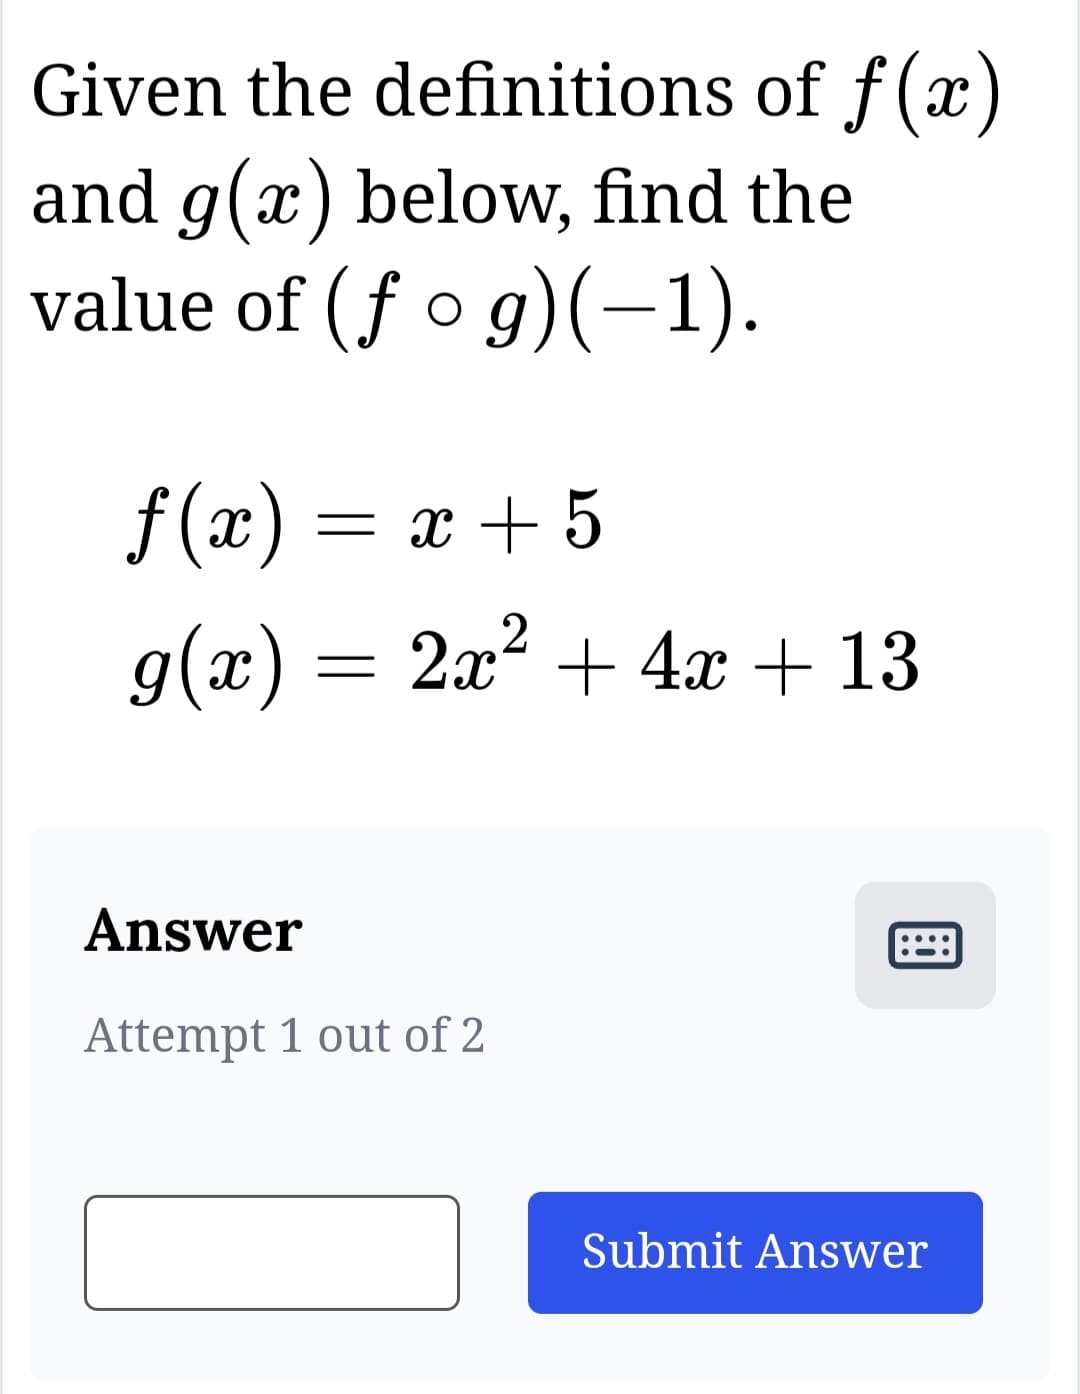 Given the definitions of f(x)
and g(x) below, find the
value of (fog)(-1).
f(x) = x + 5
g(x) = 2x² + 4x + 13
Answer
Attempt 1 out of 2
Submit Answer